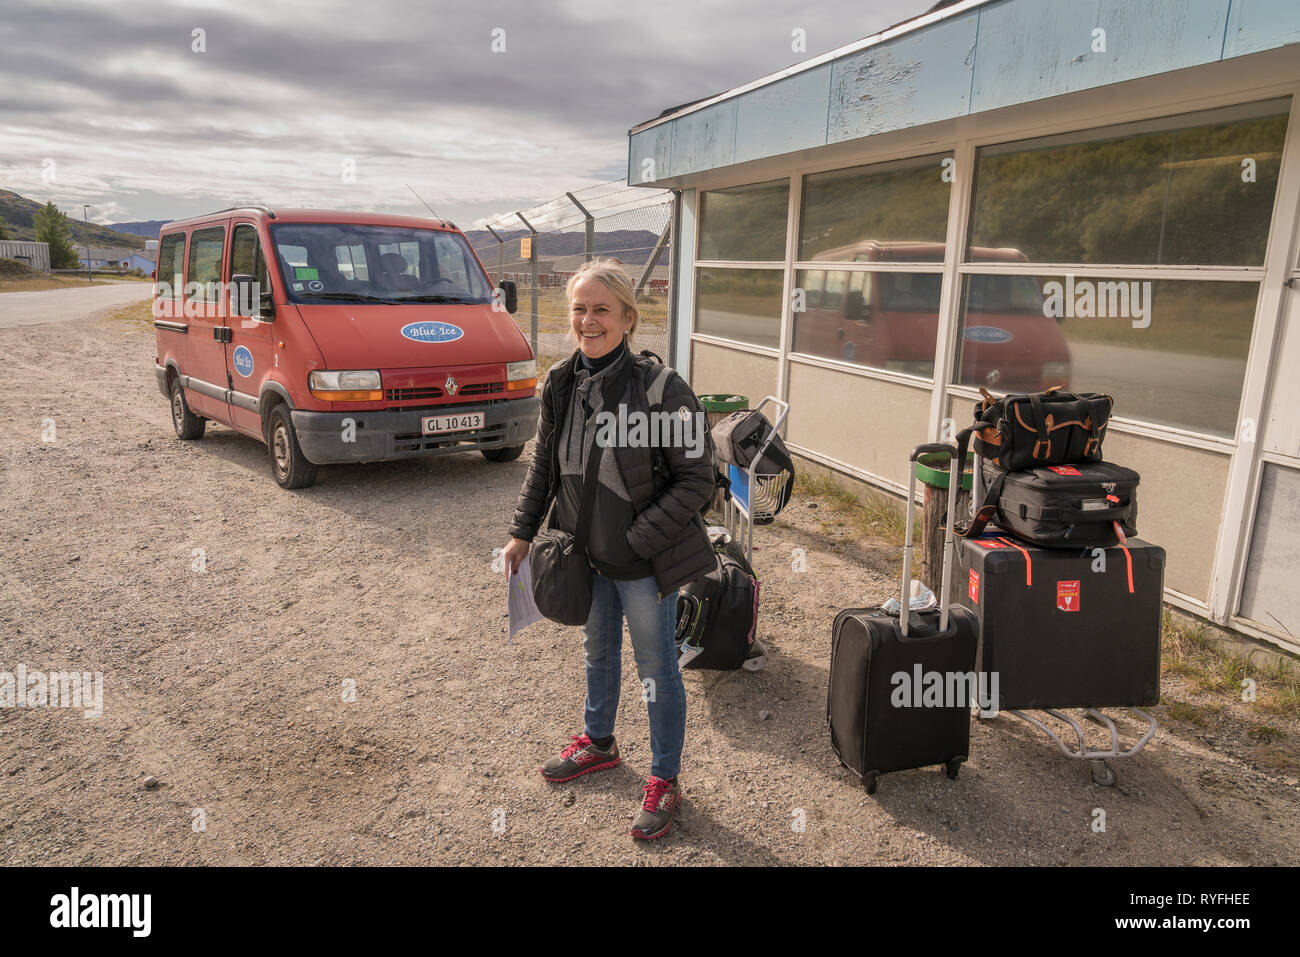 Female tourist with her luggage at the airport, Narsarsuaq, South Greenland Stock Photo